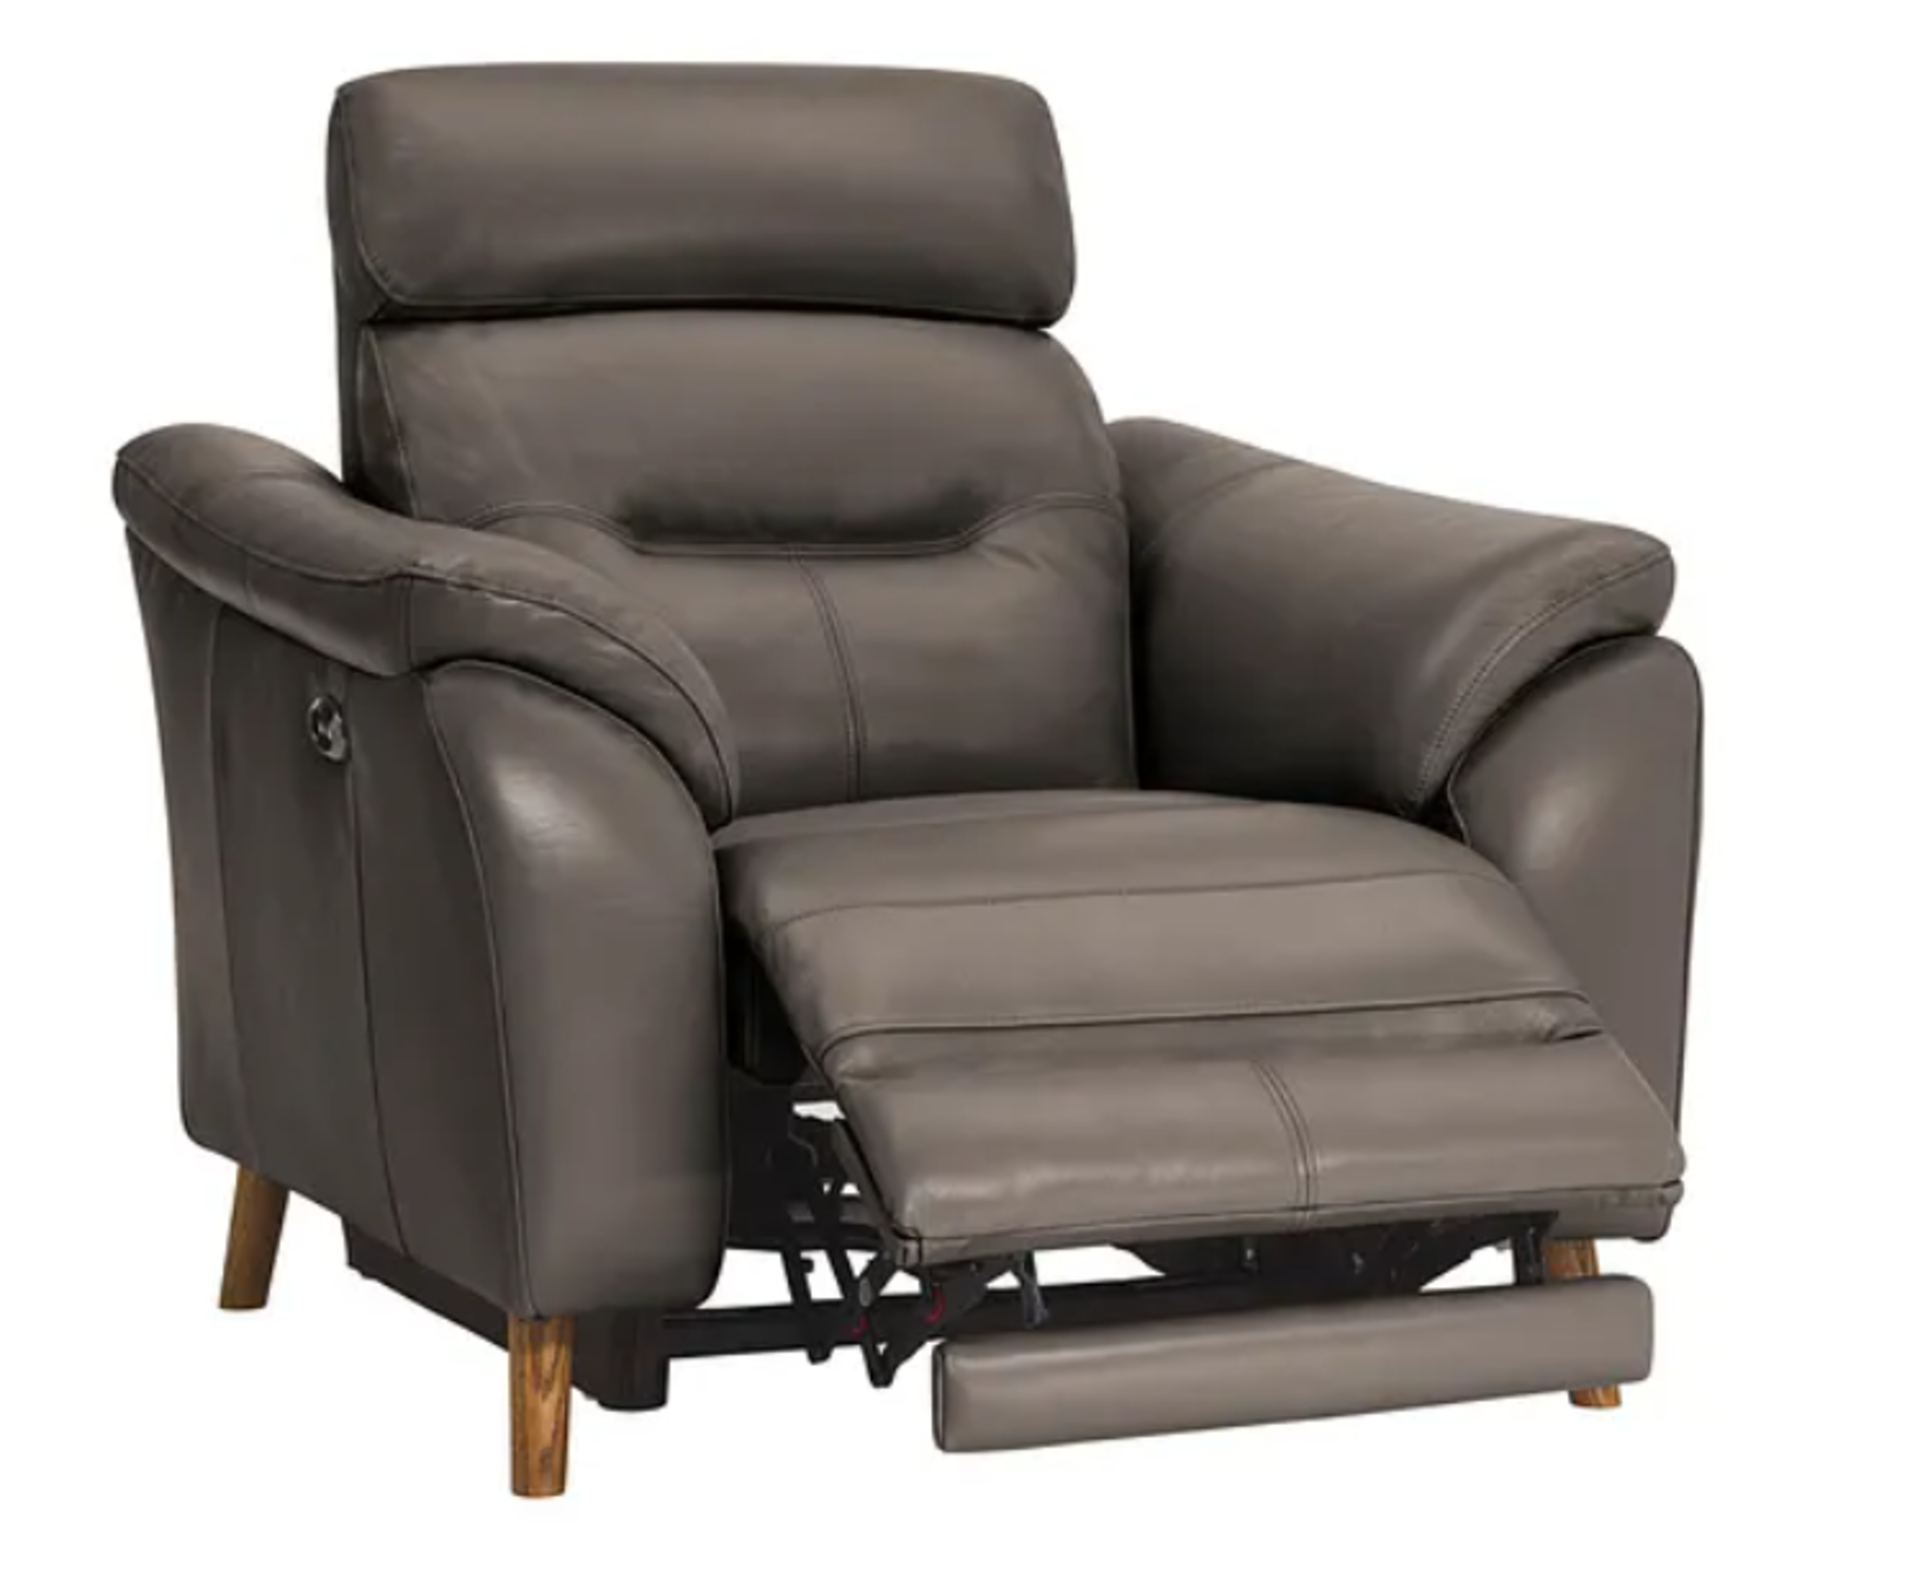 Muse Electric Recliner Armchair | Dark Grey Leather RRP £1,149.99. Muse brings recliner style - Image 2 of 2